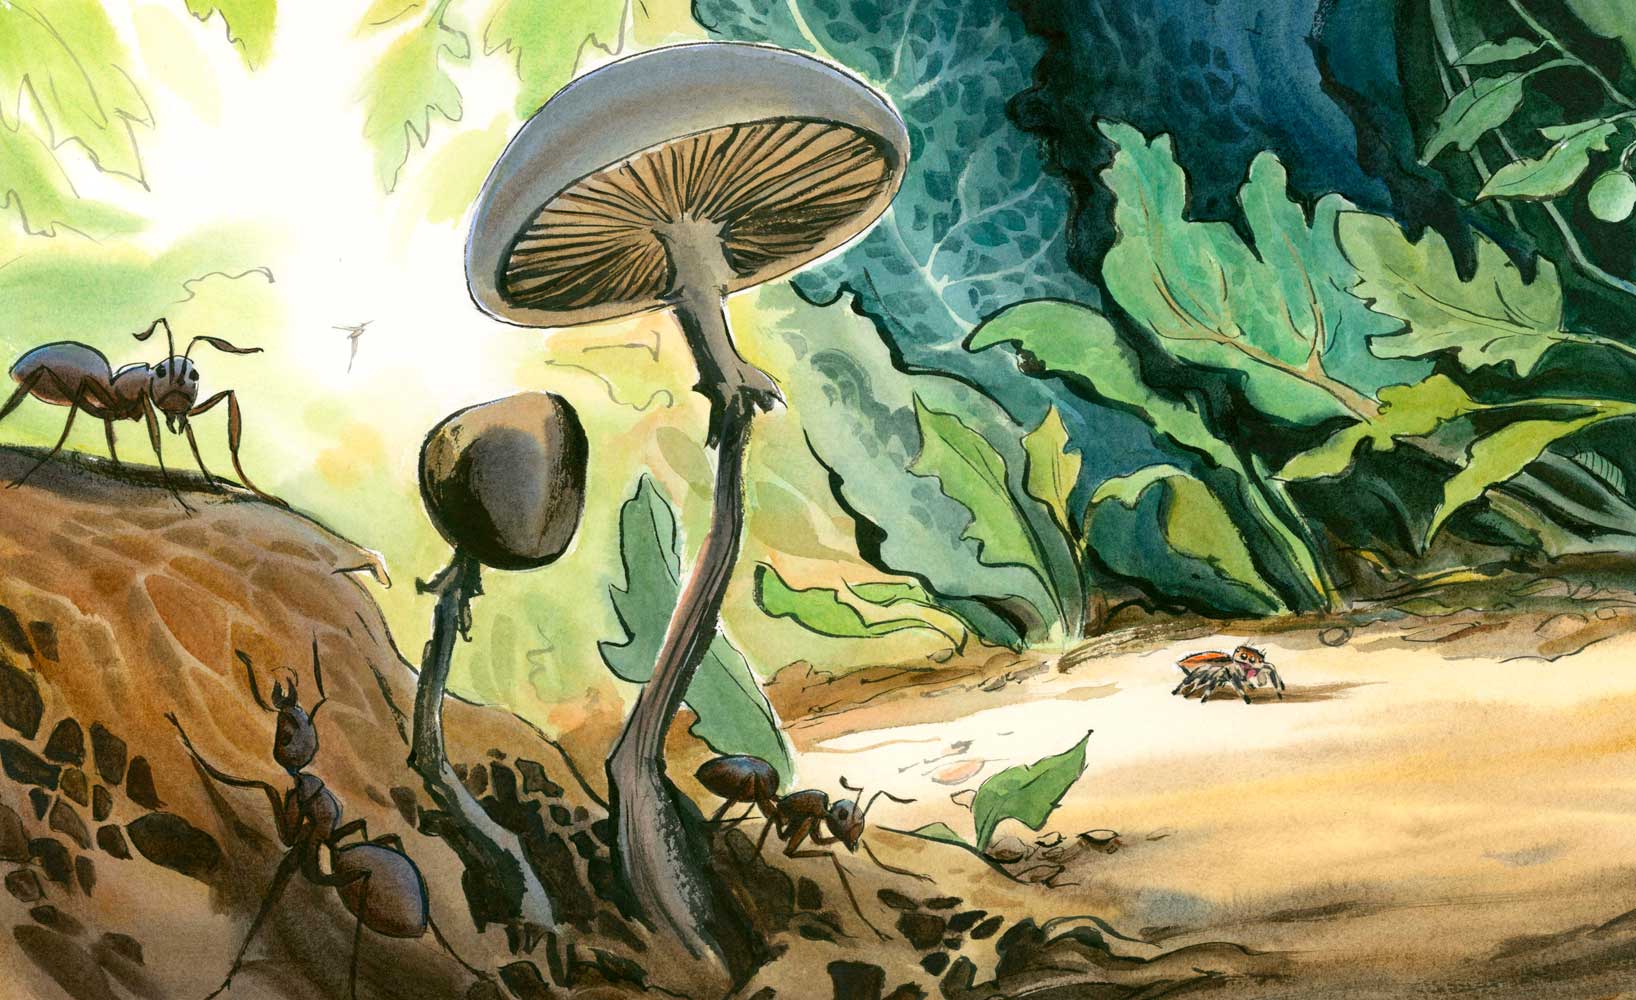 Watercolor illustration by Jessica Lanan from 'Jumper: A Day in the Life of a Backyard Jumping Spider' Showing a tiny jumping spider looking nervous as it walks on the dirt beneath large garden leaves. In the foreground are two mushrooms and decaying leaves with ants crawling on them. A flying insect is visible in the distance.